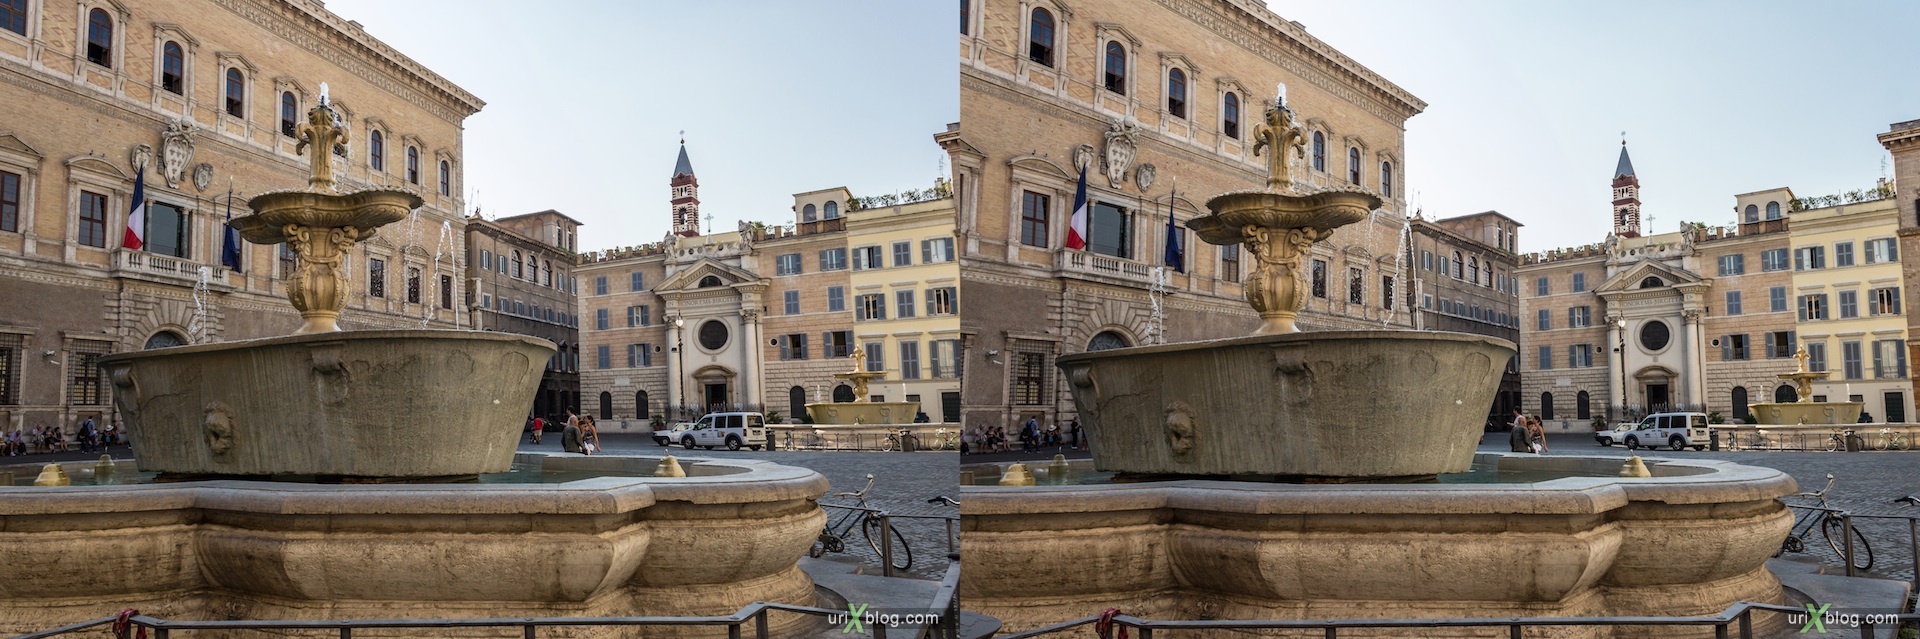 2012, fountain, Farnese square, Rome, Italy, 3D, stereo pair, cross-eyed, crossview, cross view stereo pair